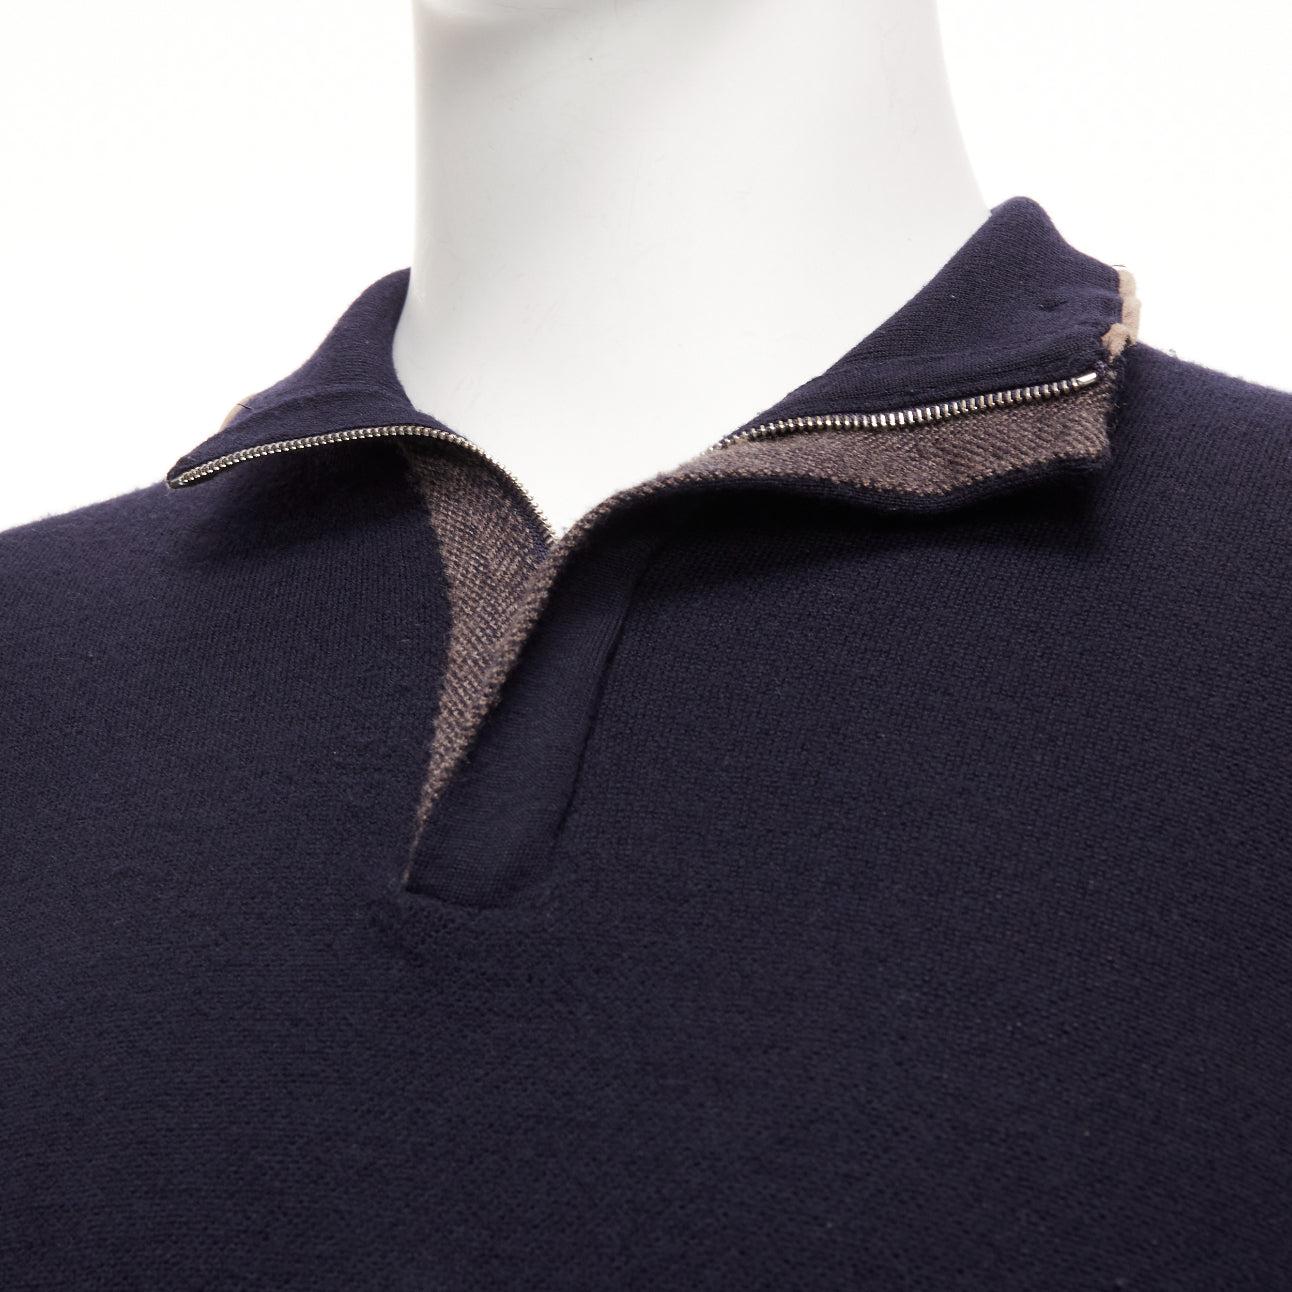 ERMENEGILDO ZEGNA wool cashmere navy grey button detail half zip sweater IT50 L
Reference: JSLE/A00123
Brand: Ermenegildo Zegna
Material: Wool, Cashmere
Color: Navy, Grey
Pattern: Solid
Closure: Zip
Made in: Italy

CONDITION:
Condition: Good, this